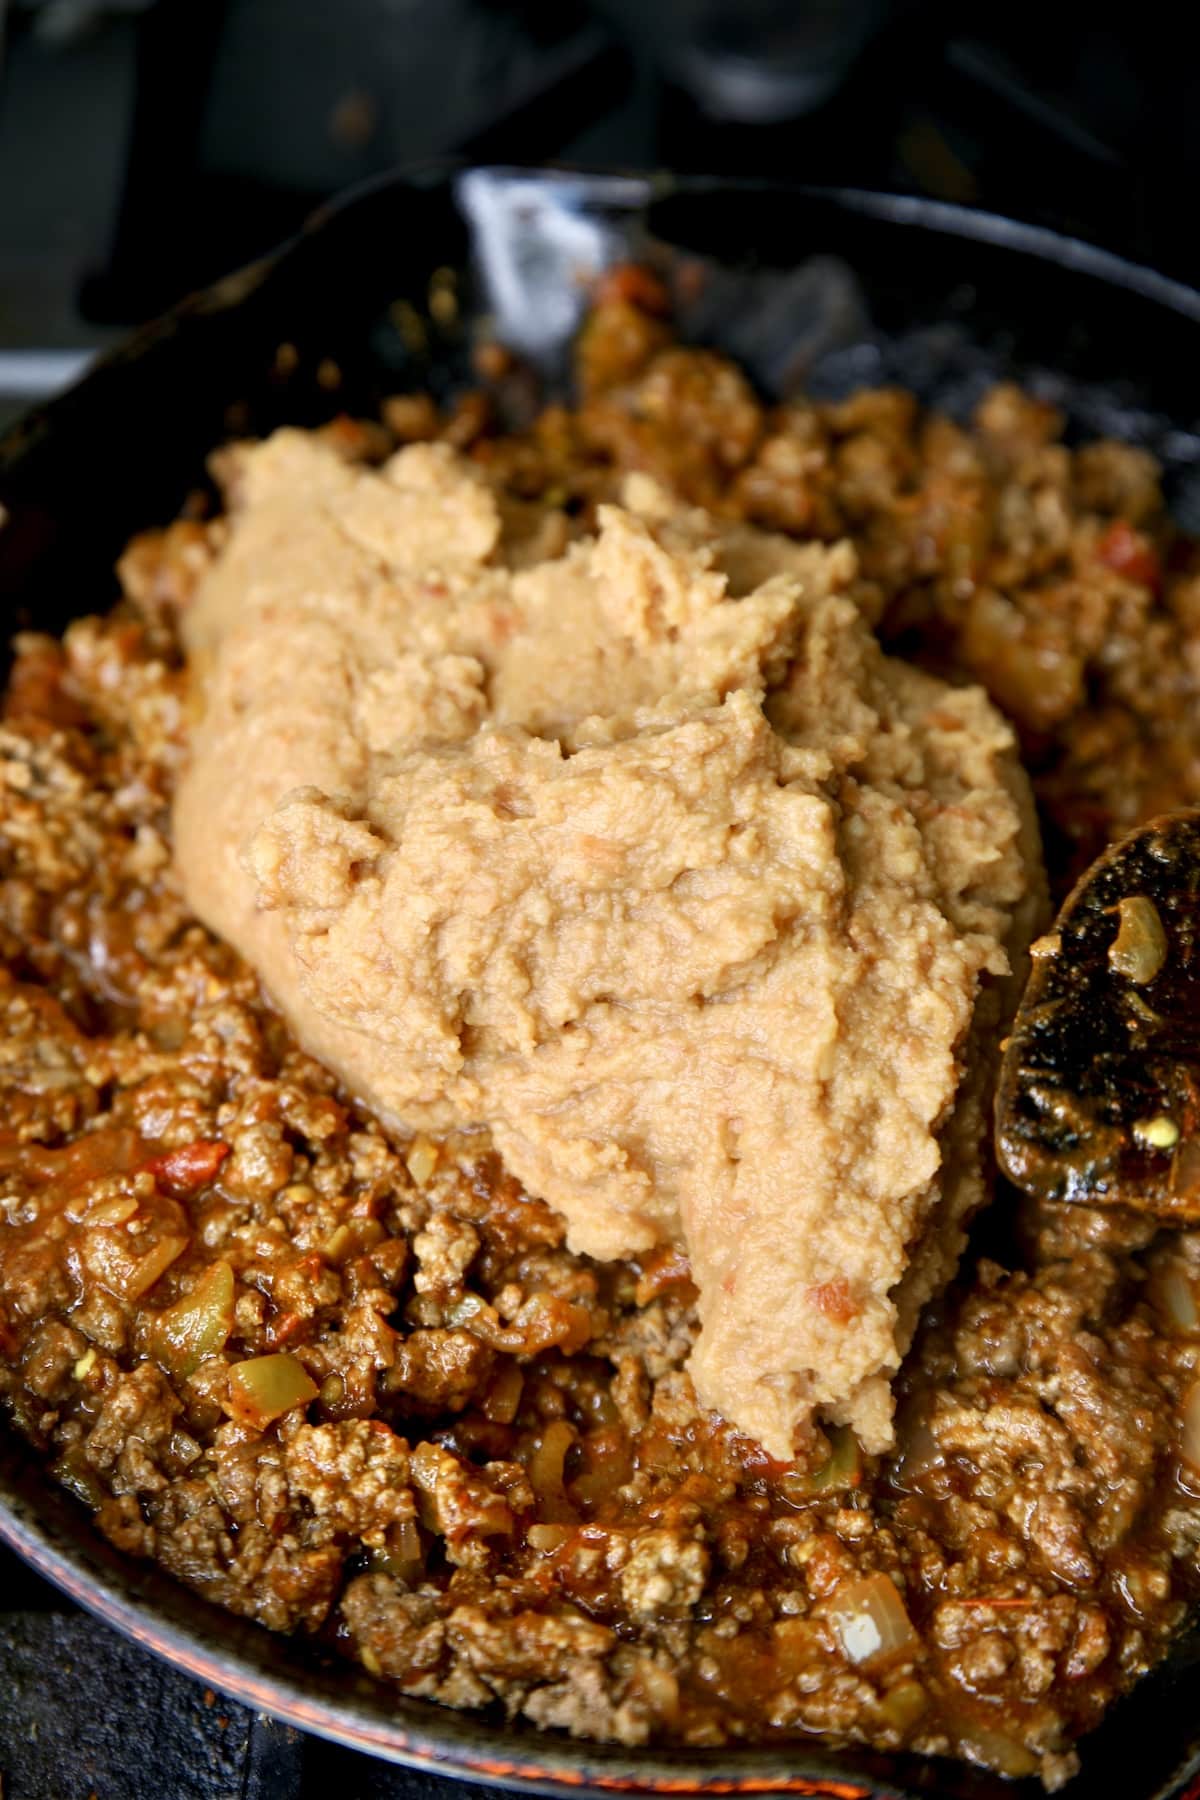 Adding refried beans to skillet with ground beef.